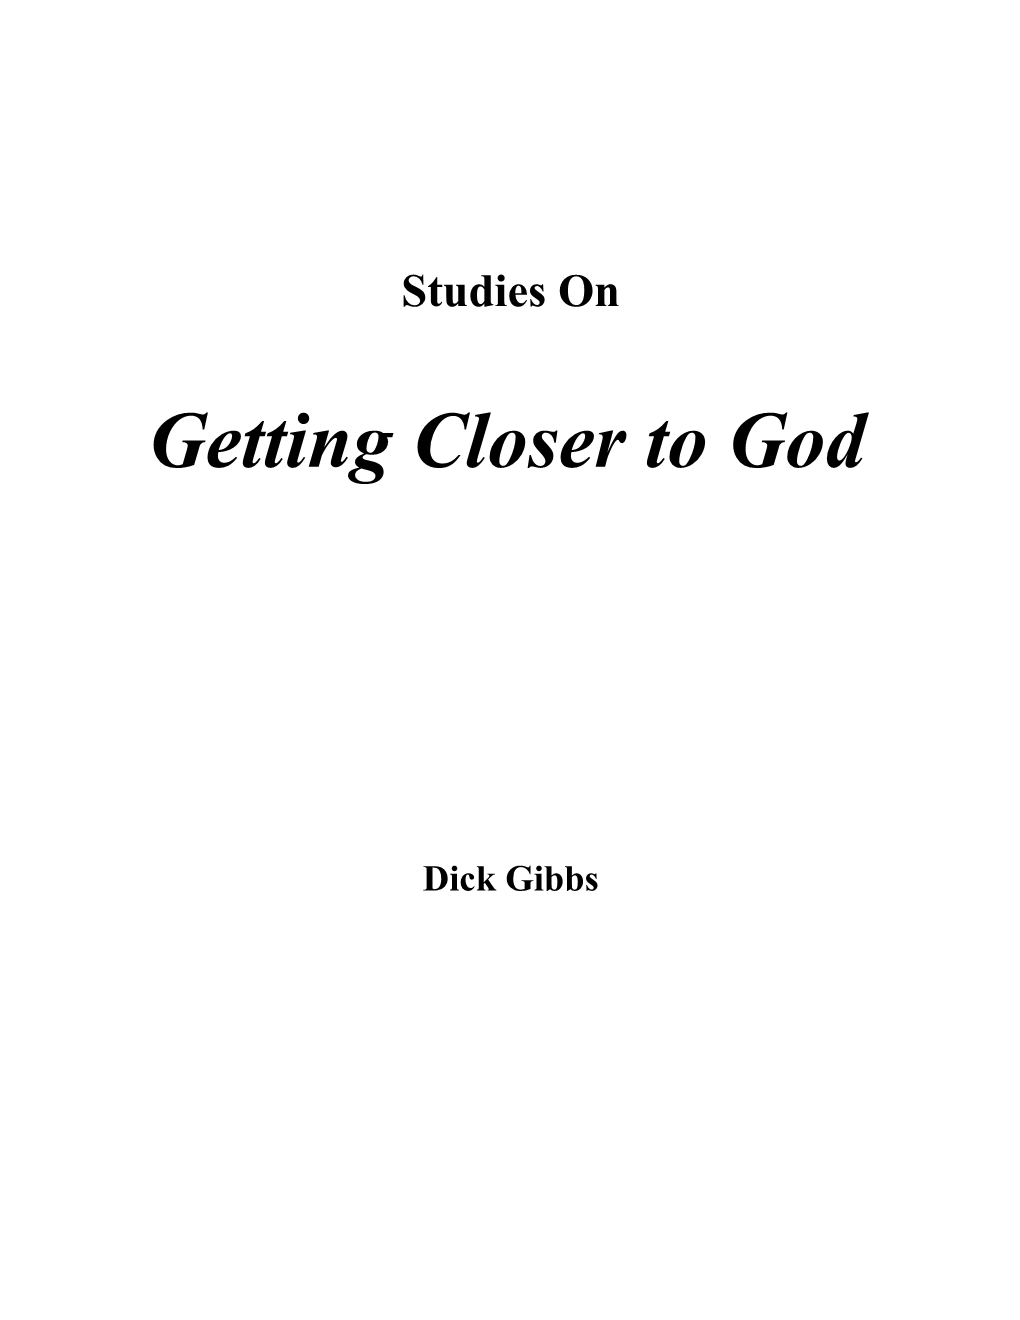 Studies on Getting Closer to God